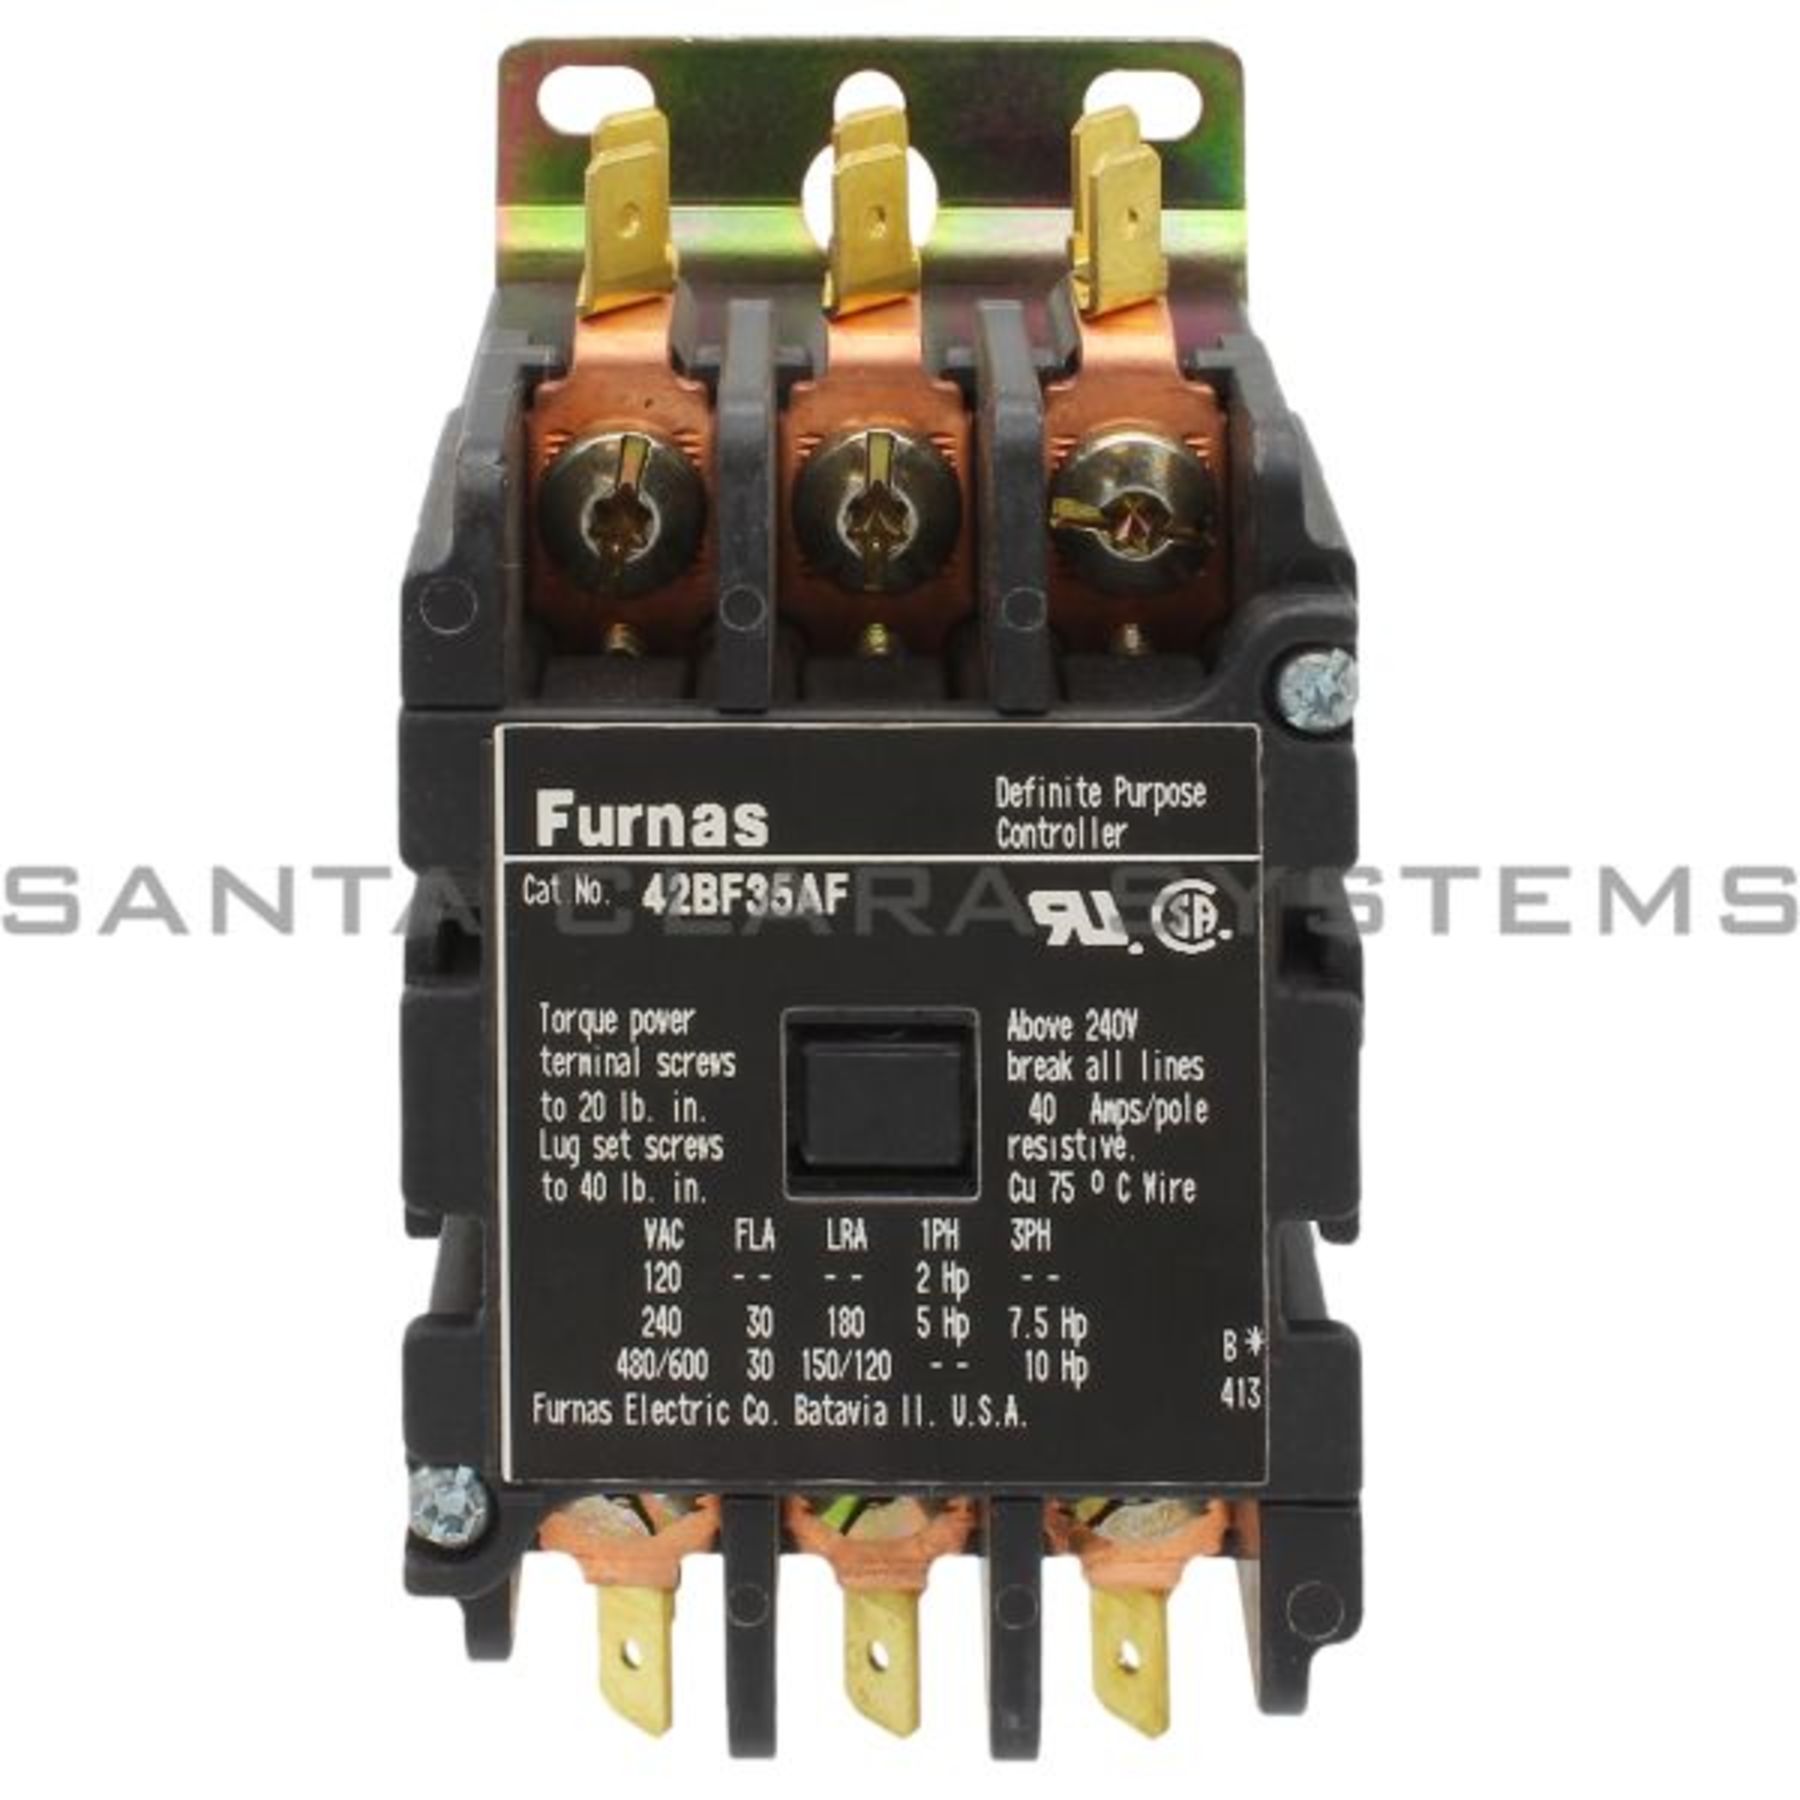 FURNAS Definite Purpose Contactor  42BF35AF  New Open Box Details about    1 pc 